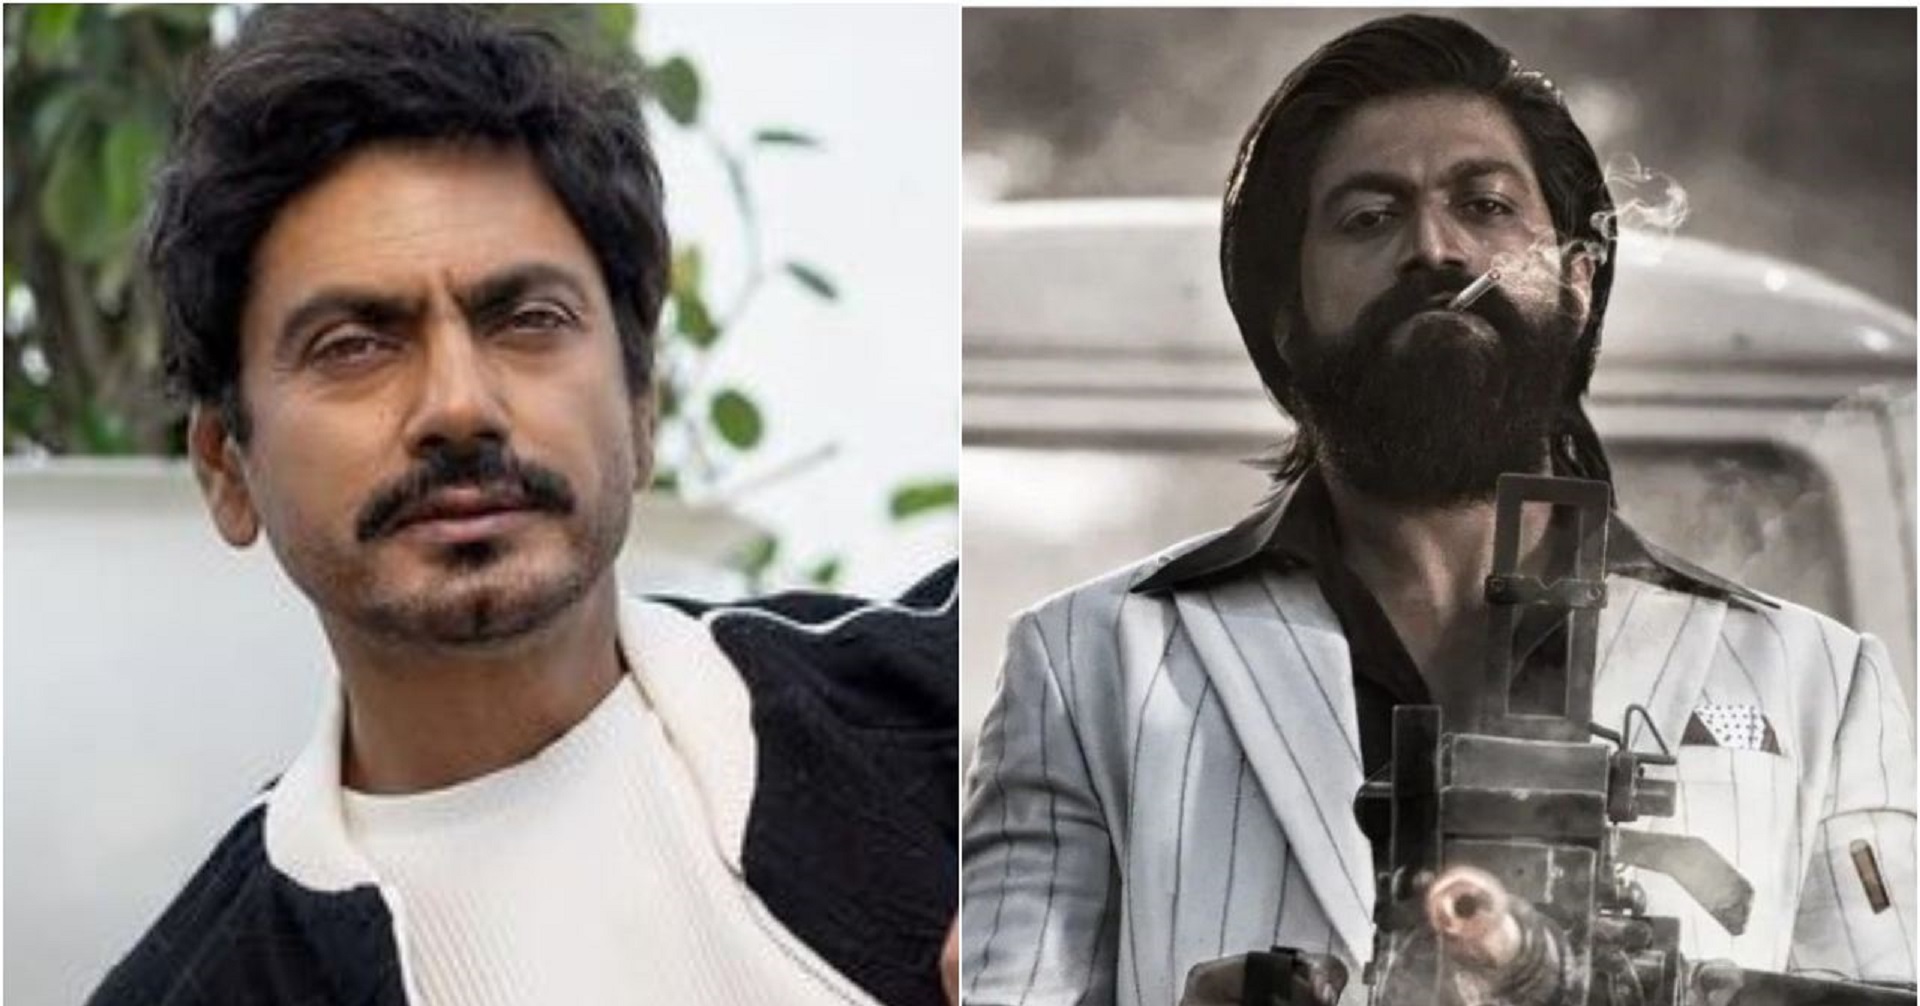 Nawazuddin Siddiqui Speaks On Success Of South Cinema: “I think it’s just a phase…people’s thoughts change after every picture”